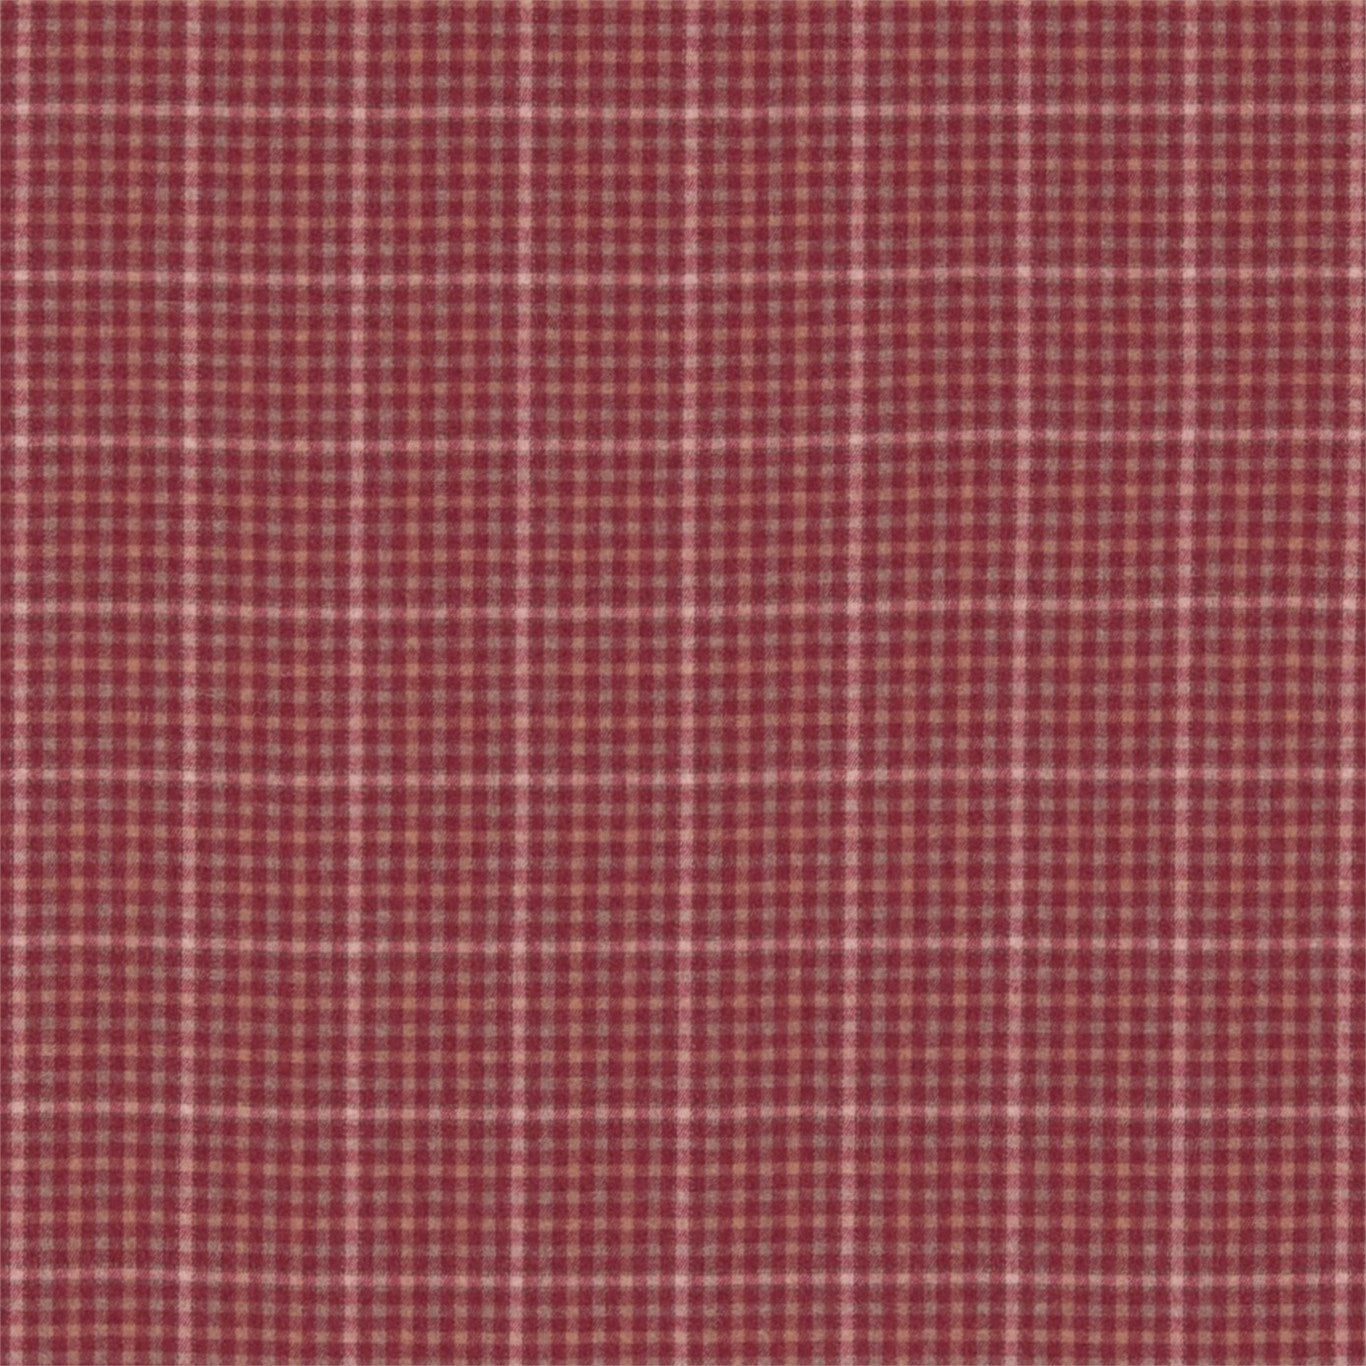 Langtry Fabric by Sanderson